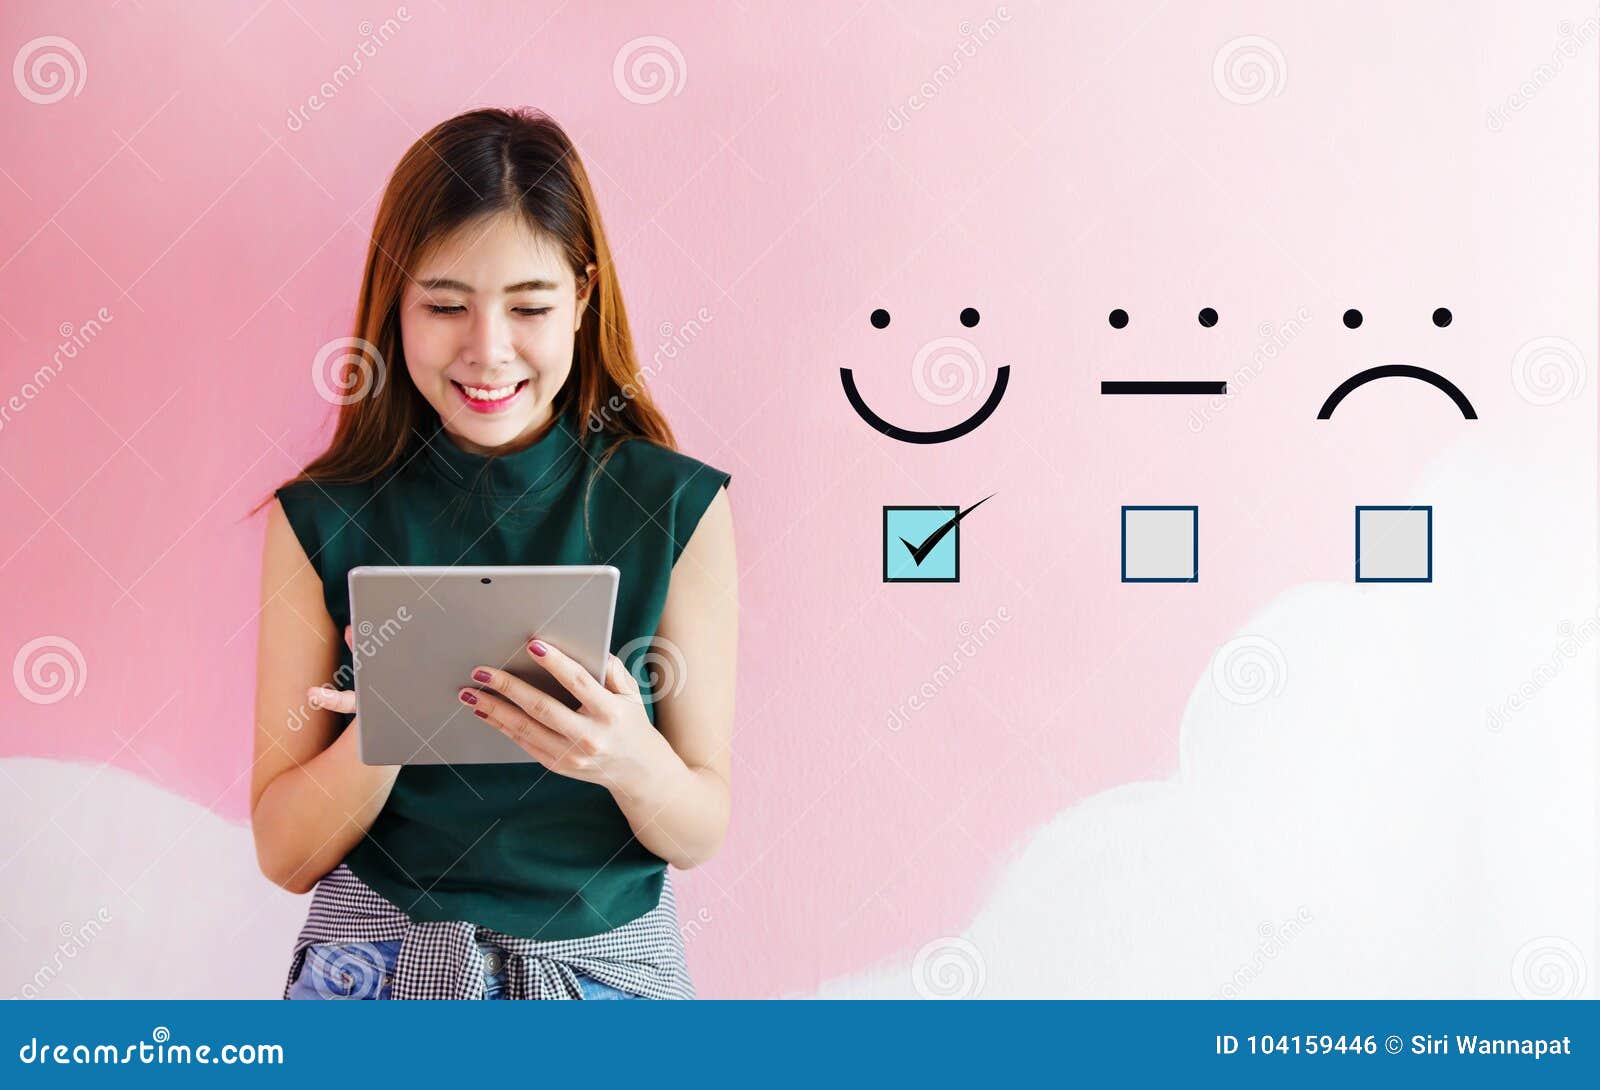 customer experience concept, happy client woman holding digital